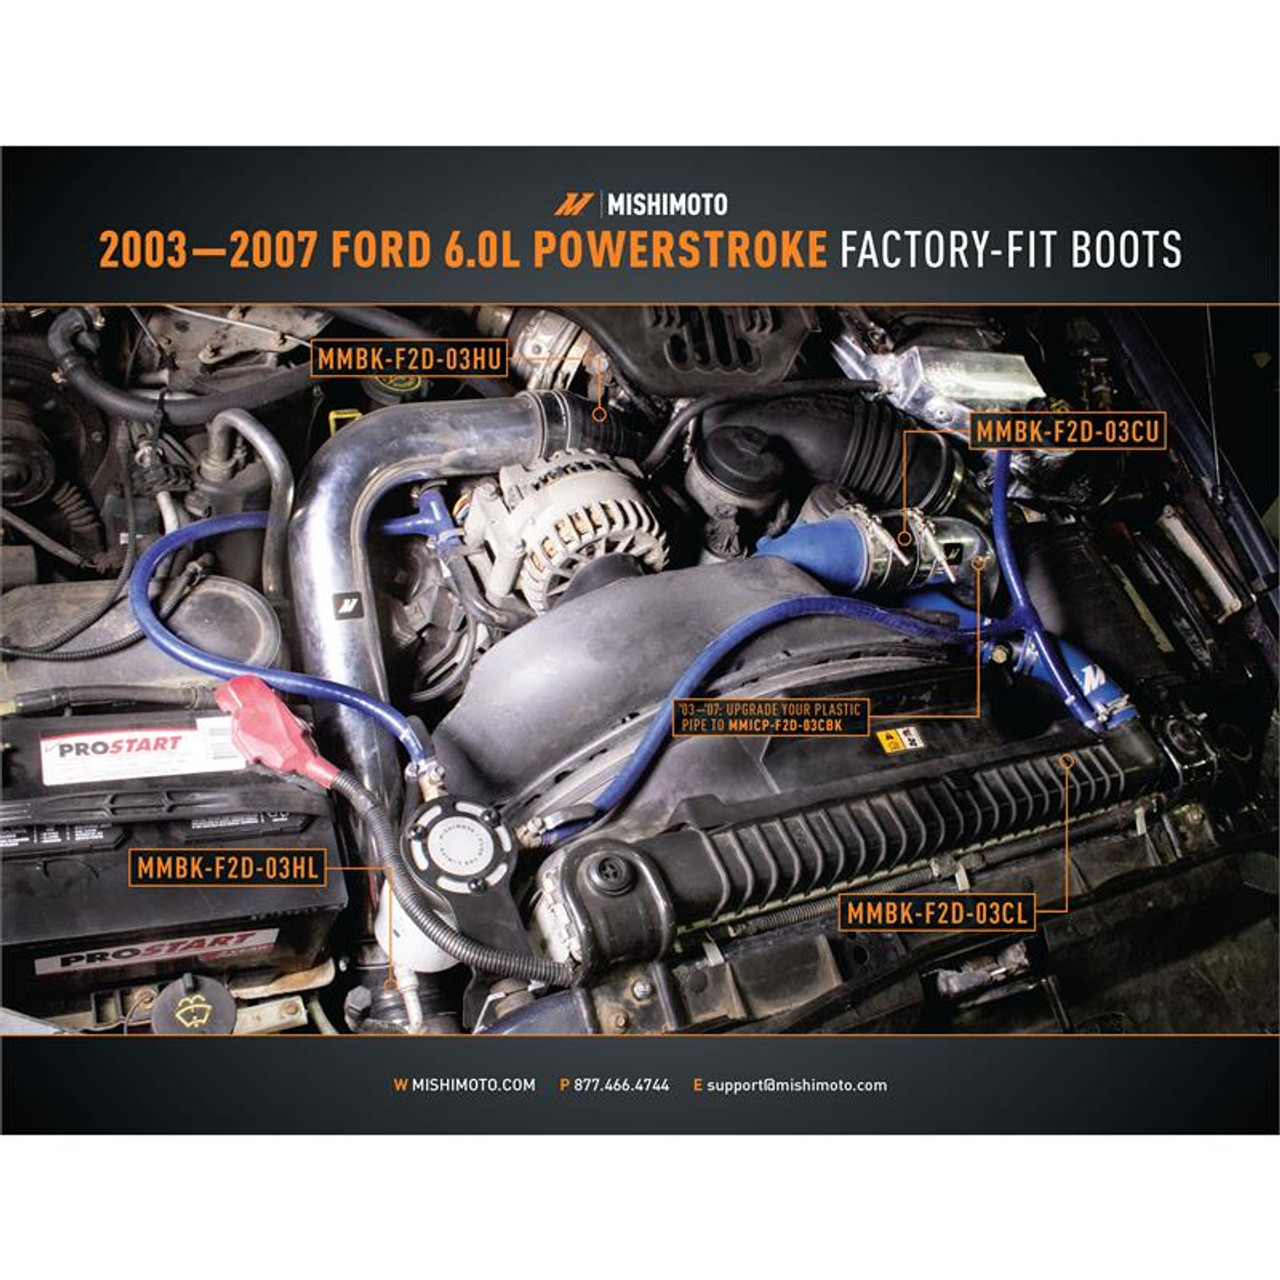 MISHIMOTO MMBK-F2D-03CL FACTORY FIT COLD-SIDE, LOWER BOOT, FITS FORD 6.0L  POWERSTROKE 2003–